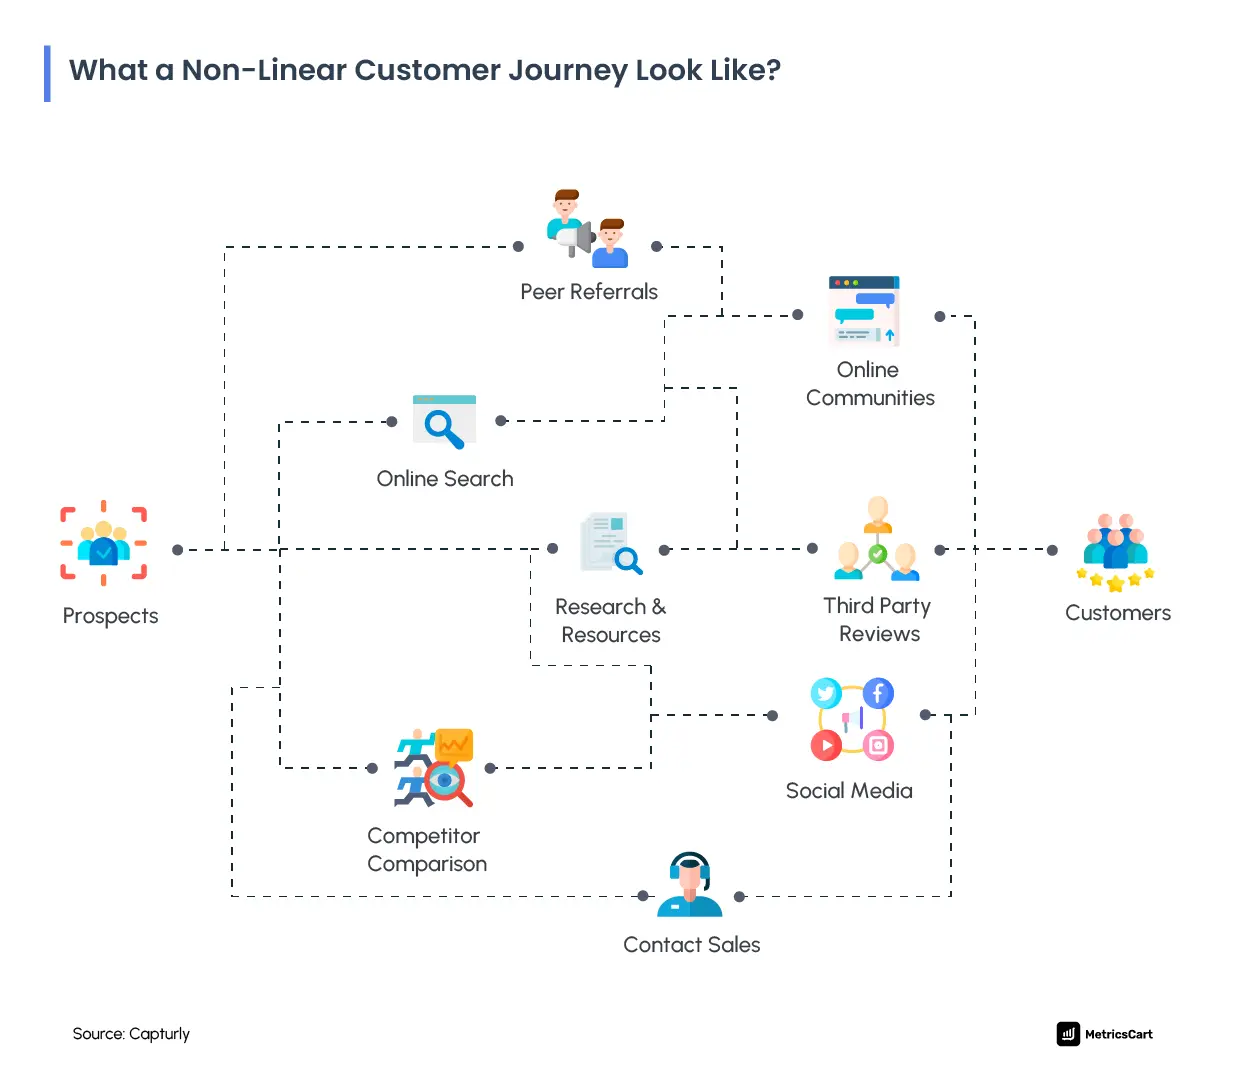 What a non-linear customer journey look like shown in a map - metricscart